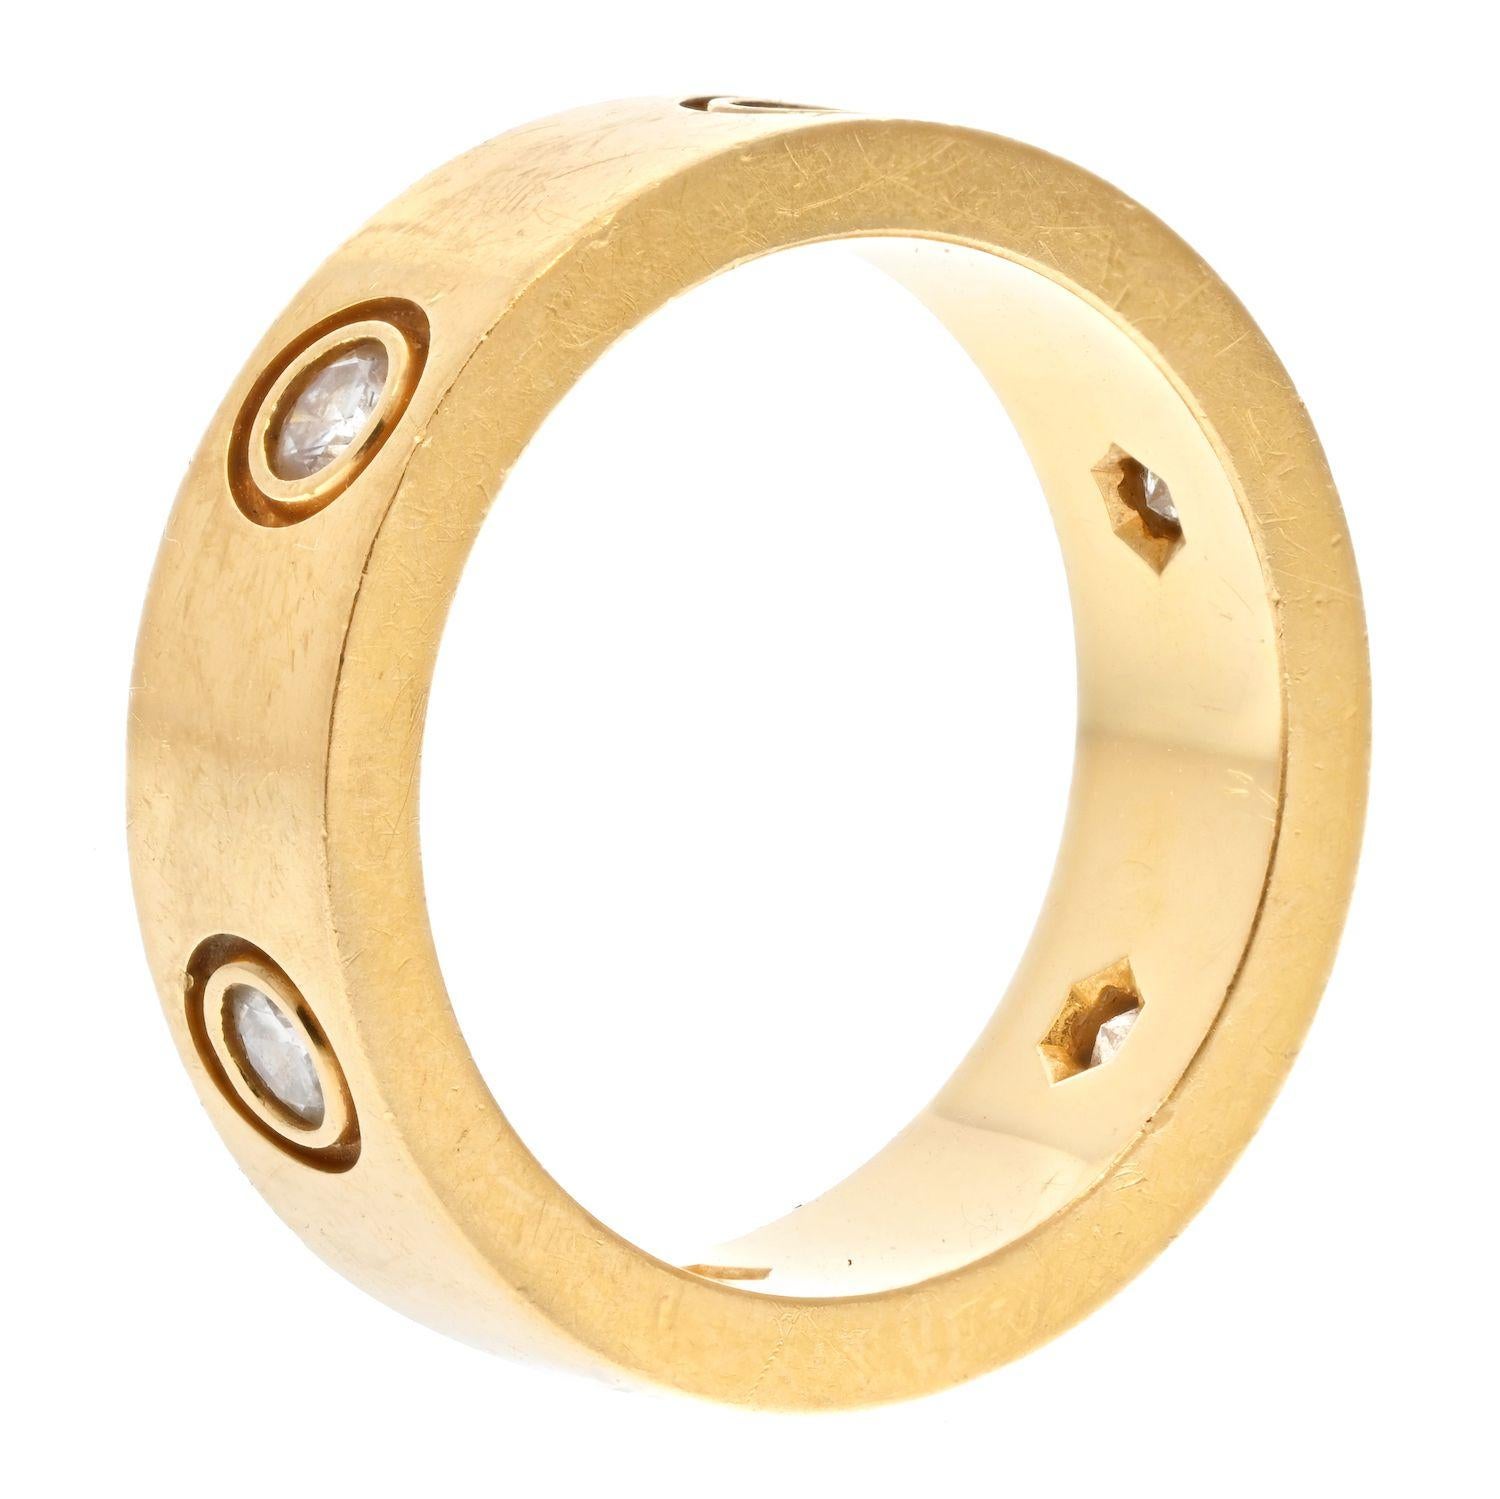 Cartier Love 18K Yellow Gold 6 Diamond Love Ring.
Pre-owned with some signs of wear this ring is in good condition. 
Features 6 diamonds, and is from the Love collection, Cartier. 
18K Yellow Gold. This ring can be polished upon request. 
Size 51. 